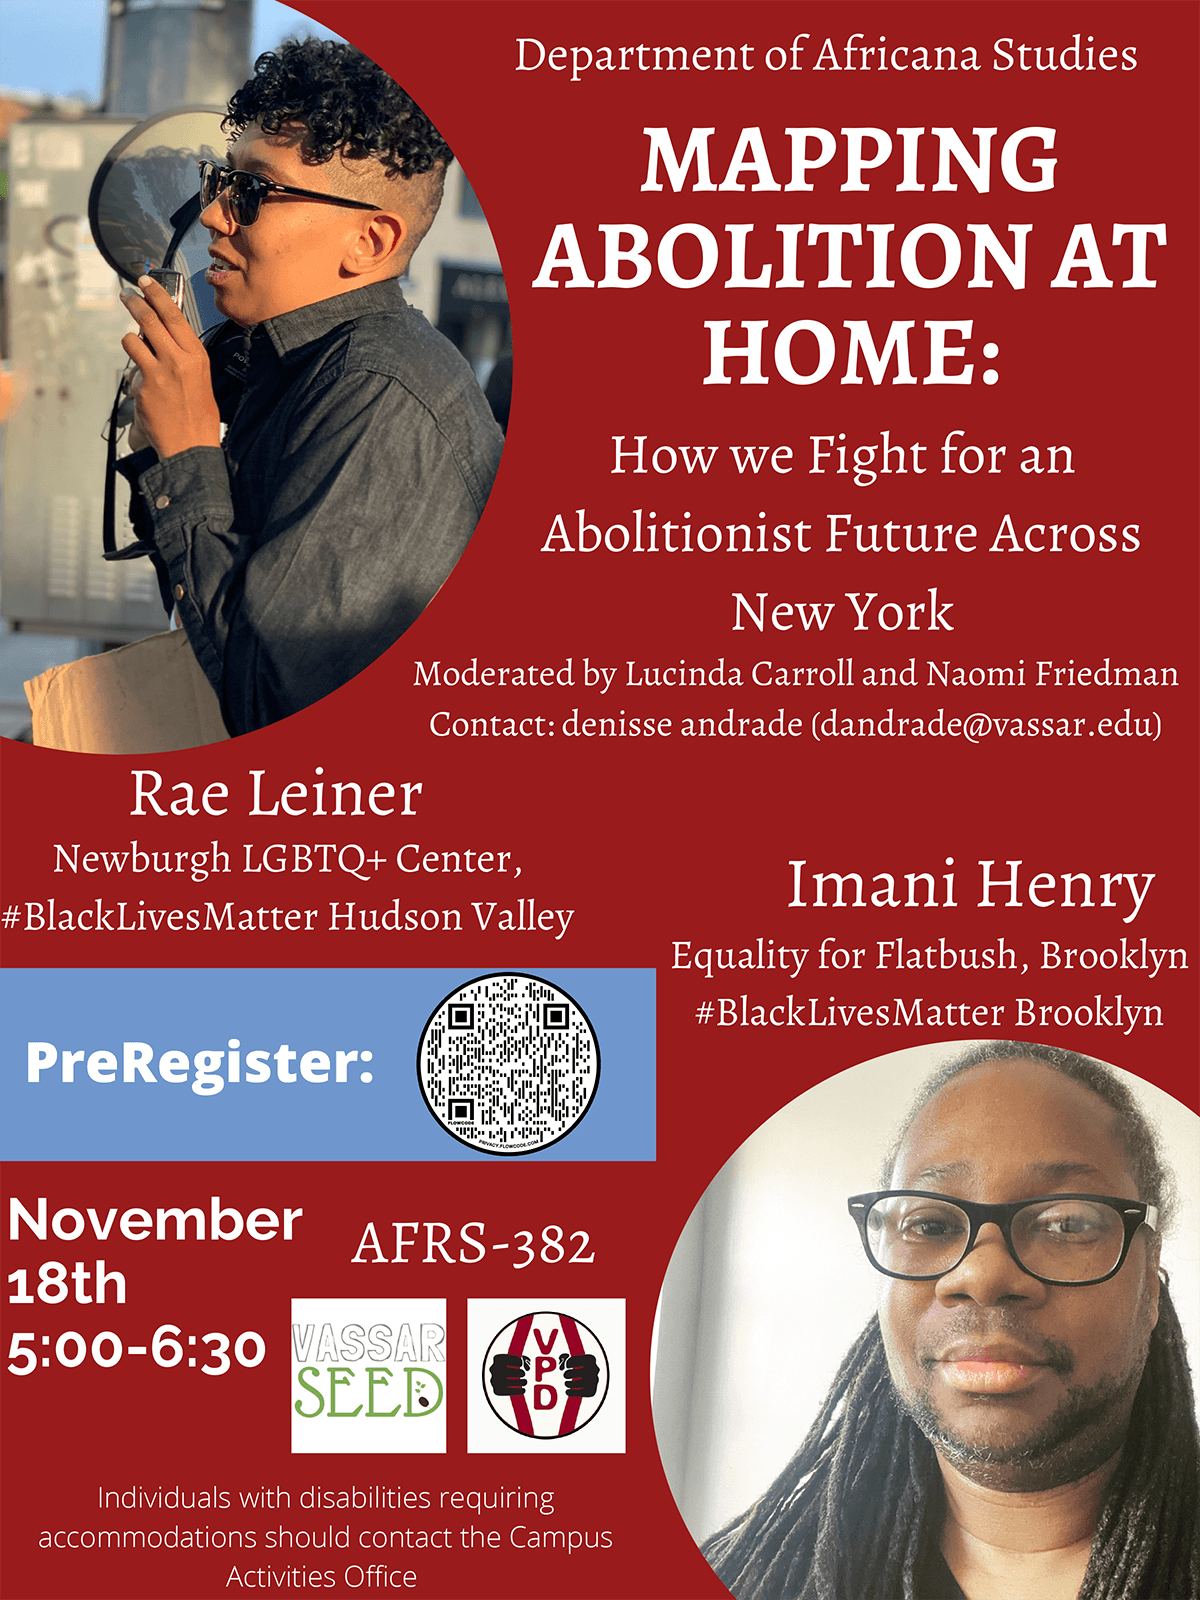 Department of Africana Studies: “Mapping Abolition at Home: How we Fight for an Abolitionist Future Across New York”. Moderated by Lucinda Carroll and Naomi Friedman. November 18th, 5–6:30 p.m.